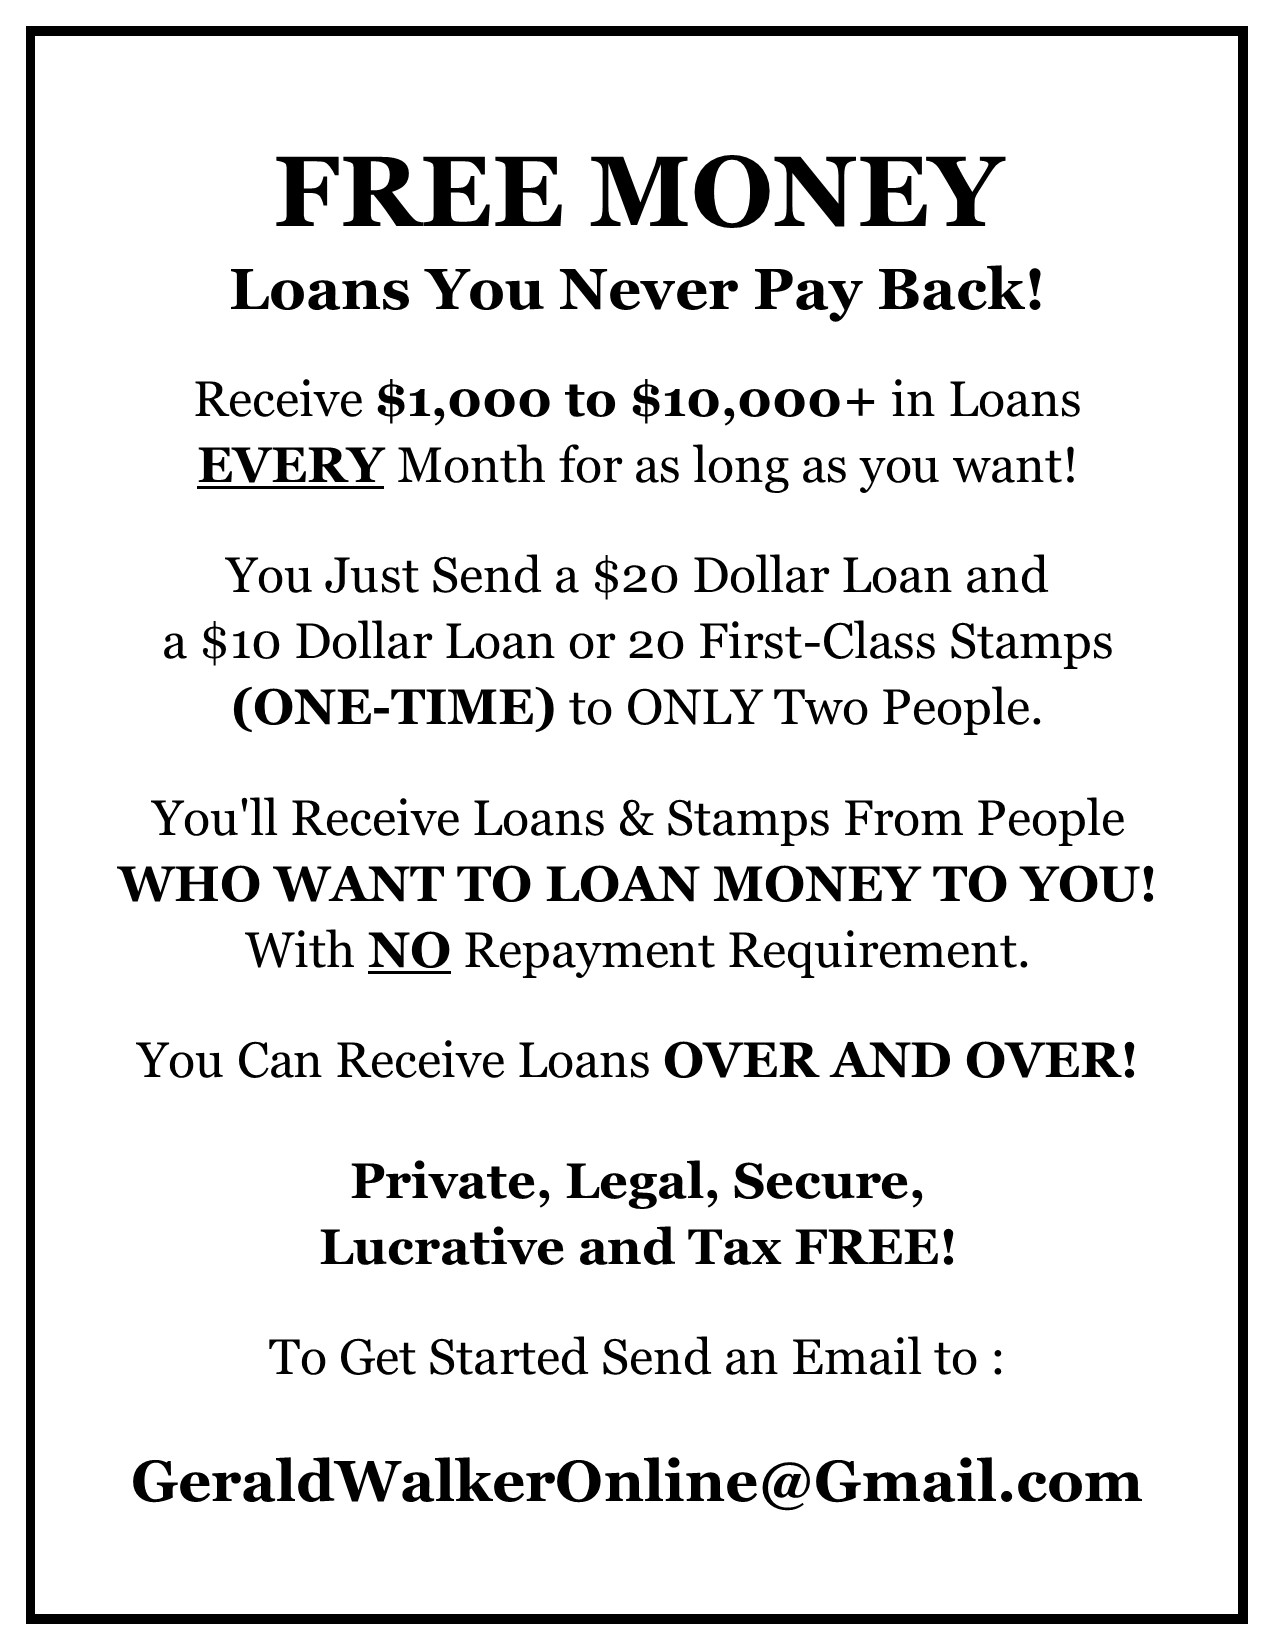 Loans You Never Pay Back